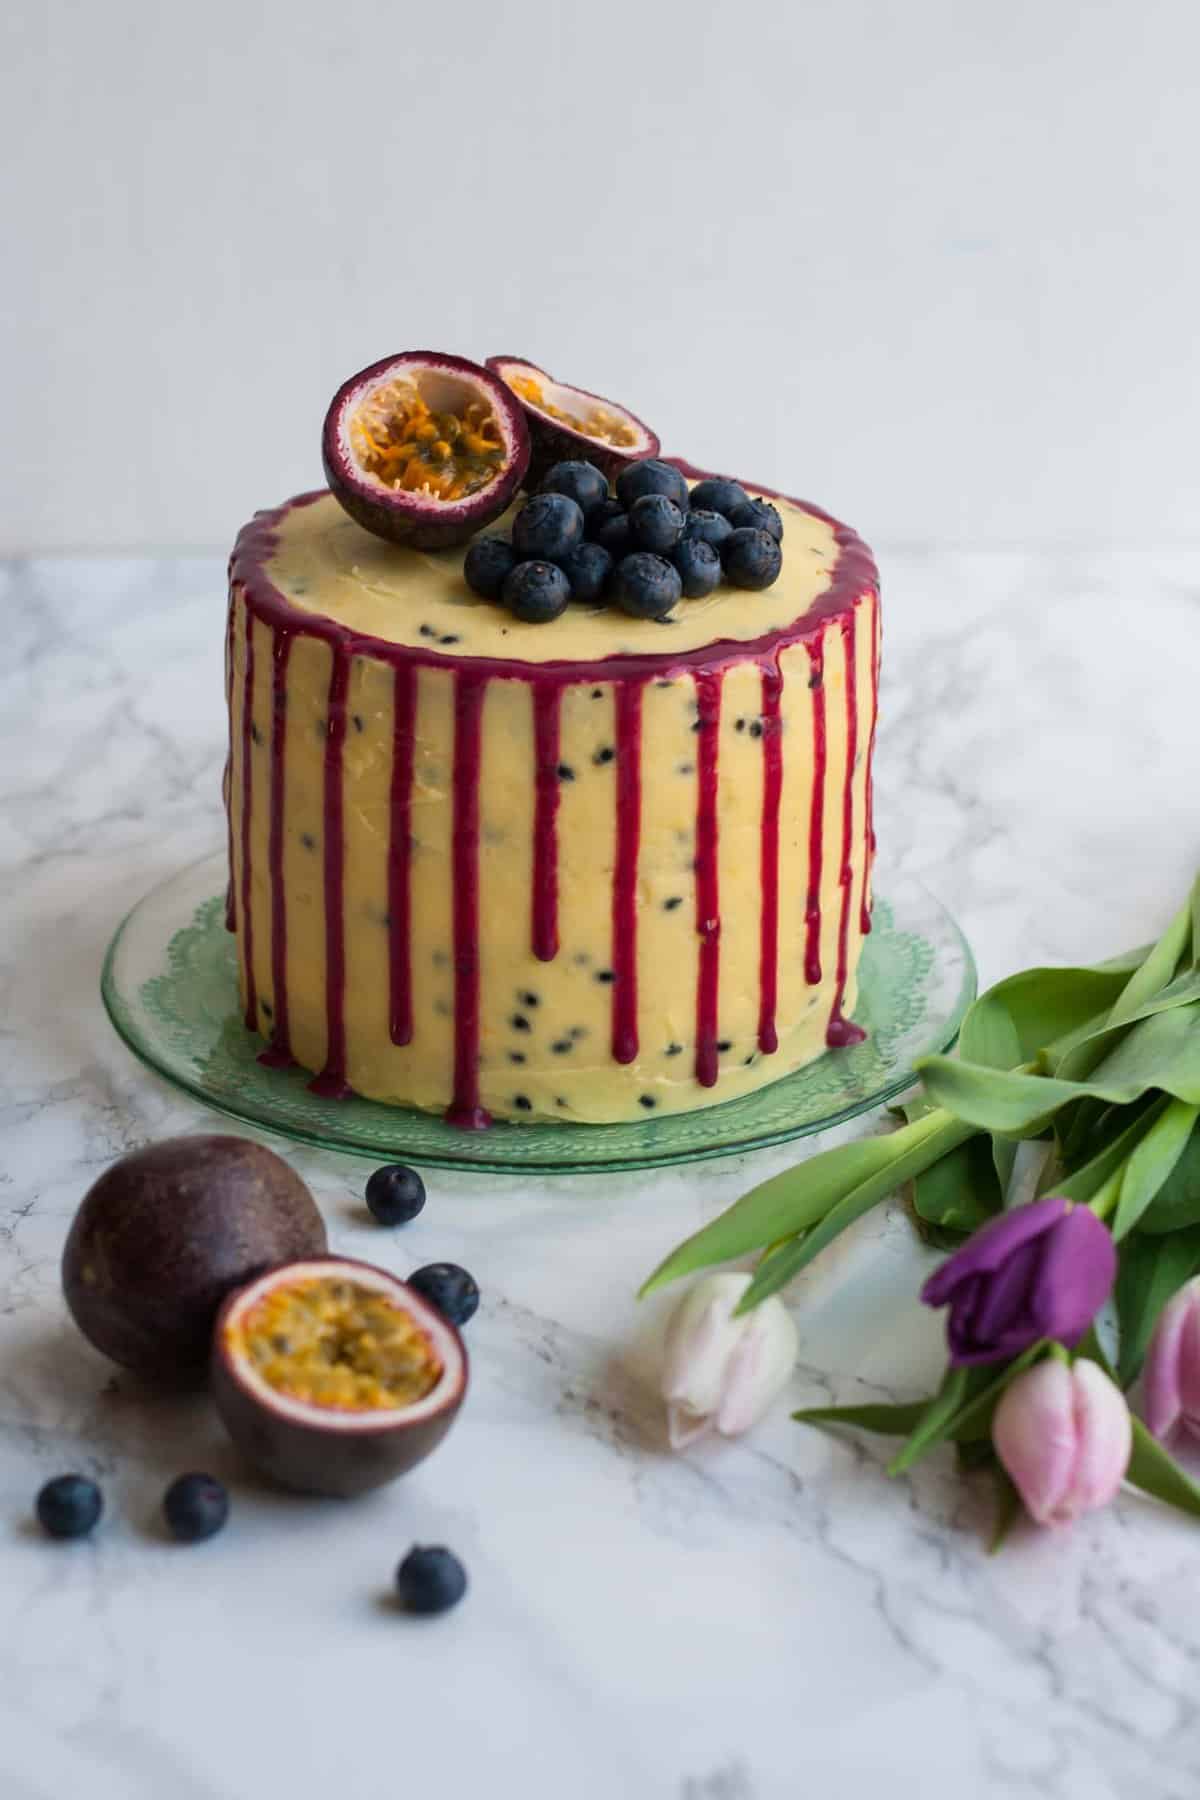 A blueberry passionfruit layer cake with with blueberries and passionfruit on top.